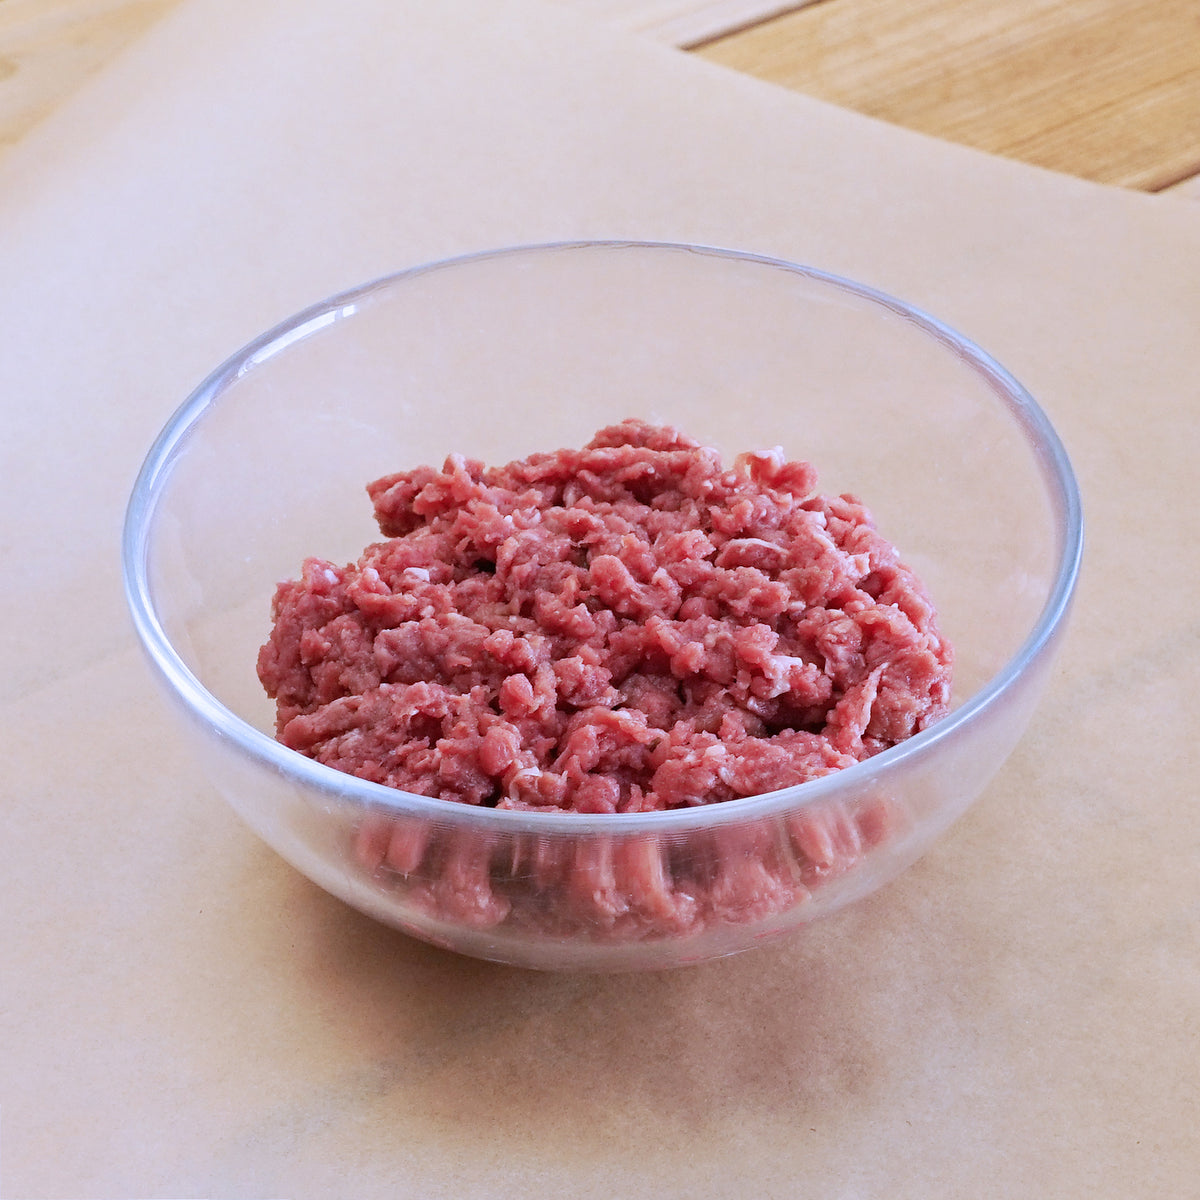 Grass-Fed Mutton Thick Skirt Mince Portioned Cubes from Australia (300g) - Horizon Farms